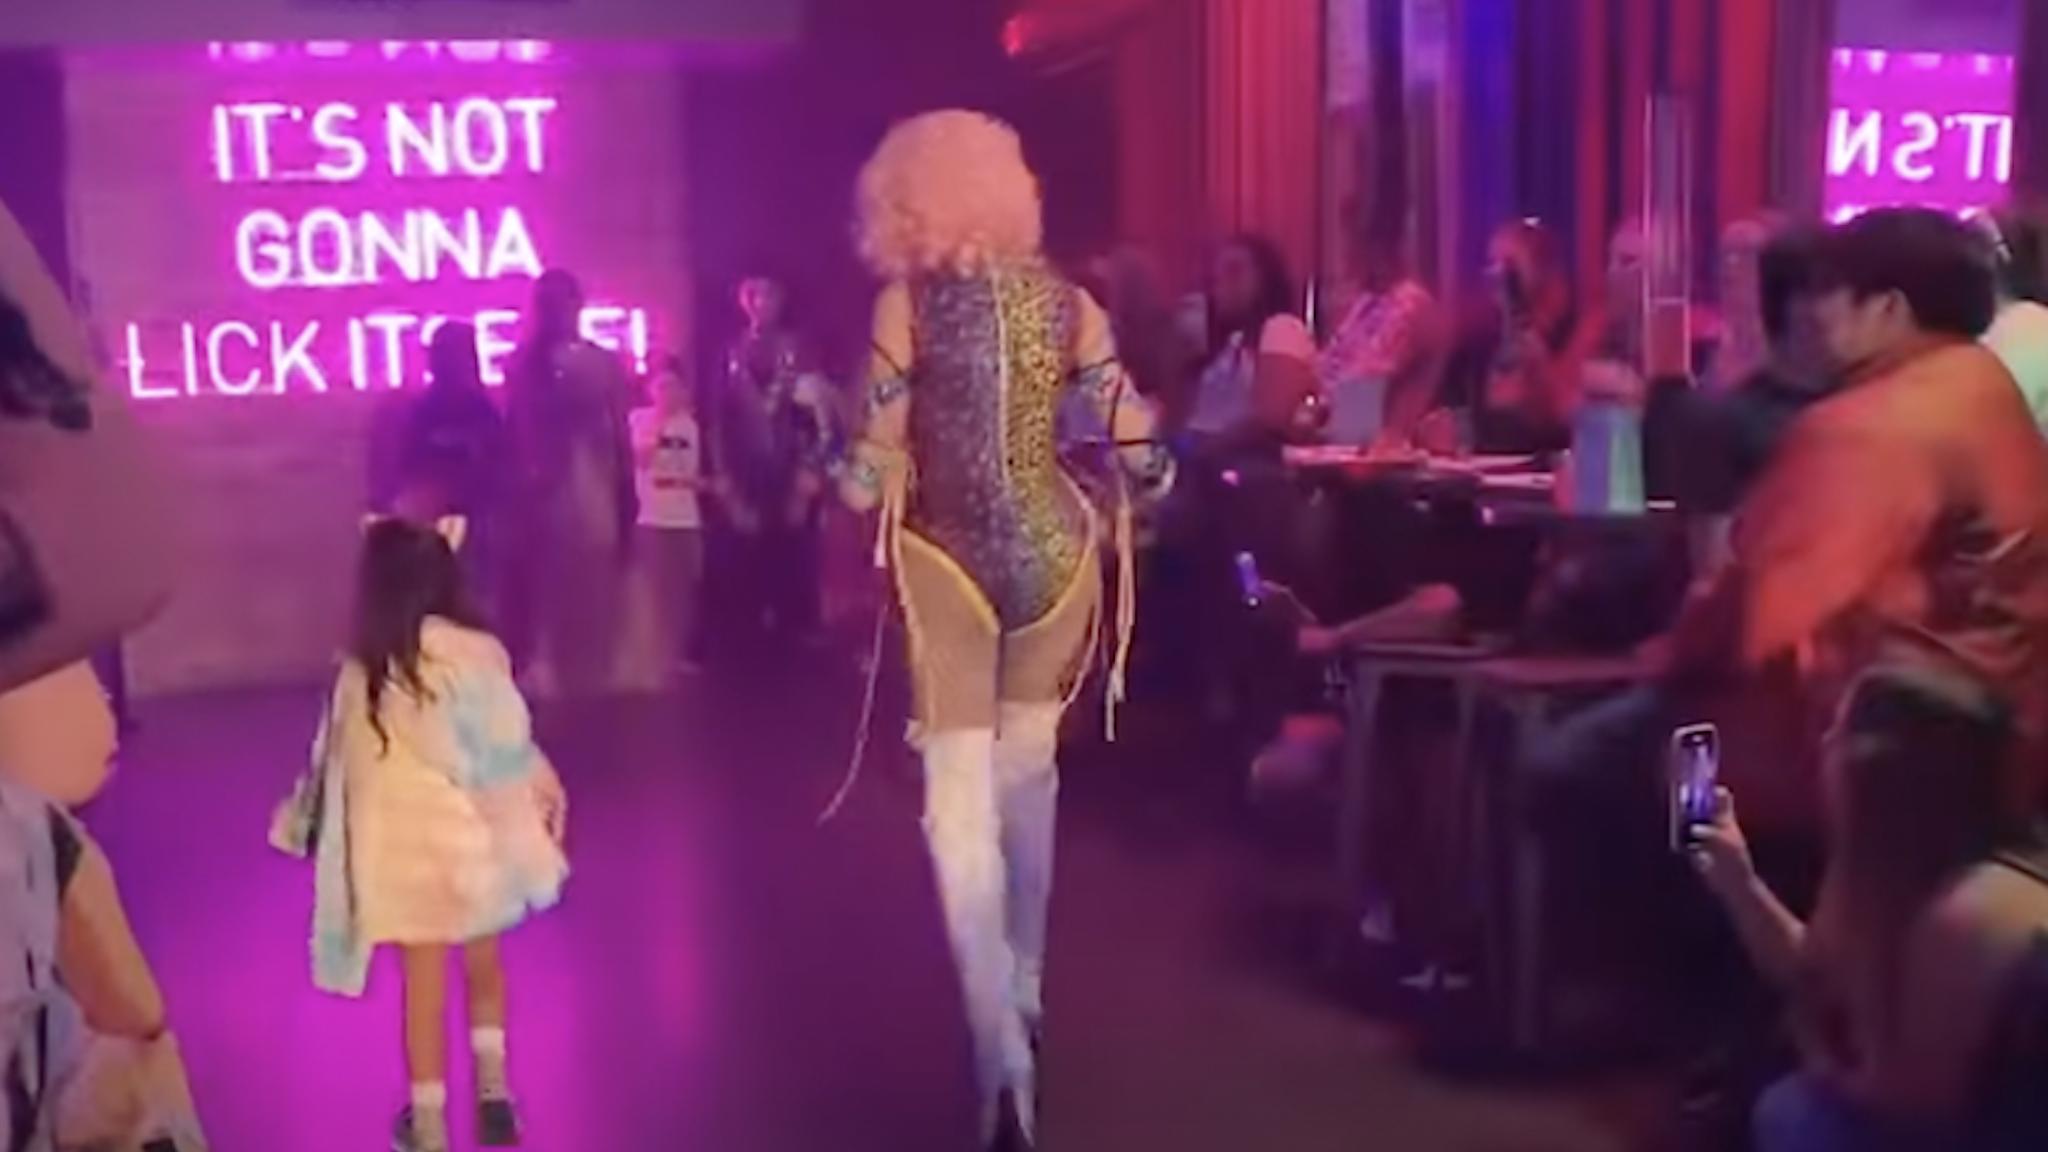 Drag queens who performed for children at a Dallas gay bar told YouTube channel Fleccas Talks the event was "educational"